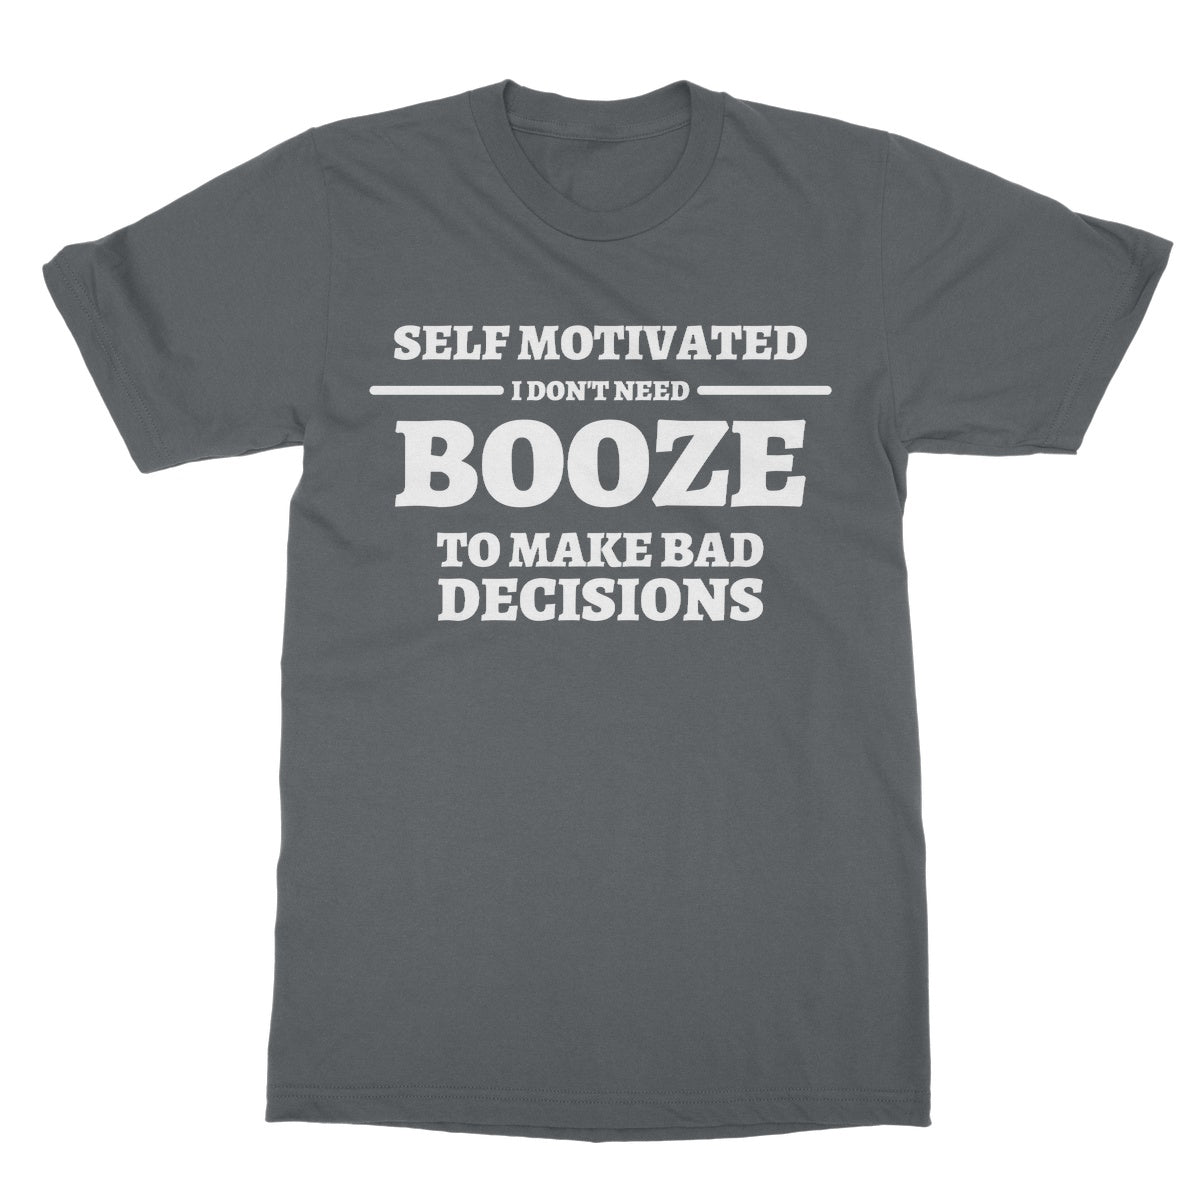 I don't need booze to make bad decisions t shirt grey